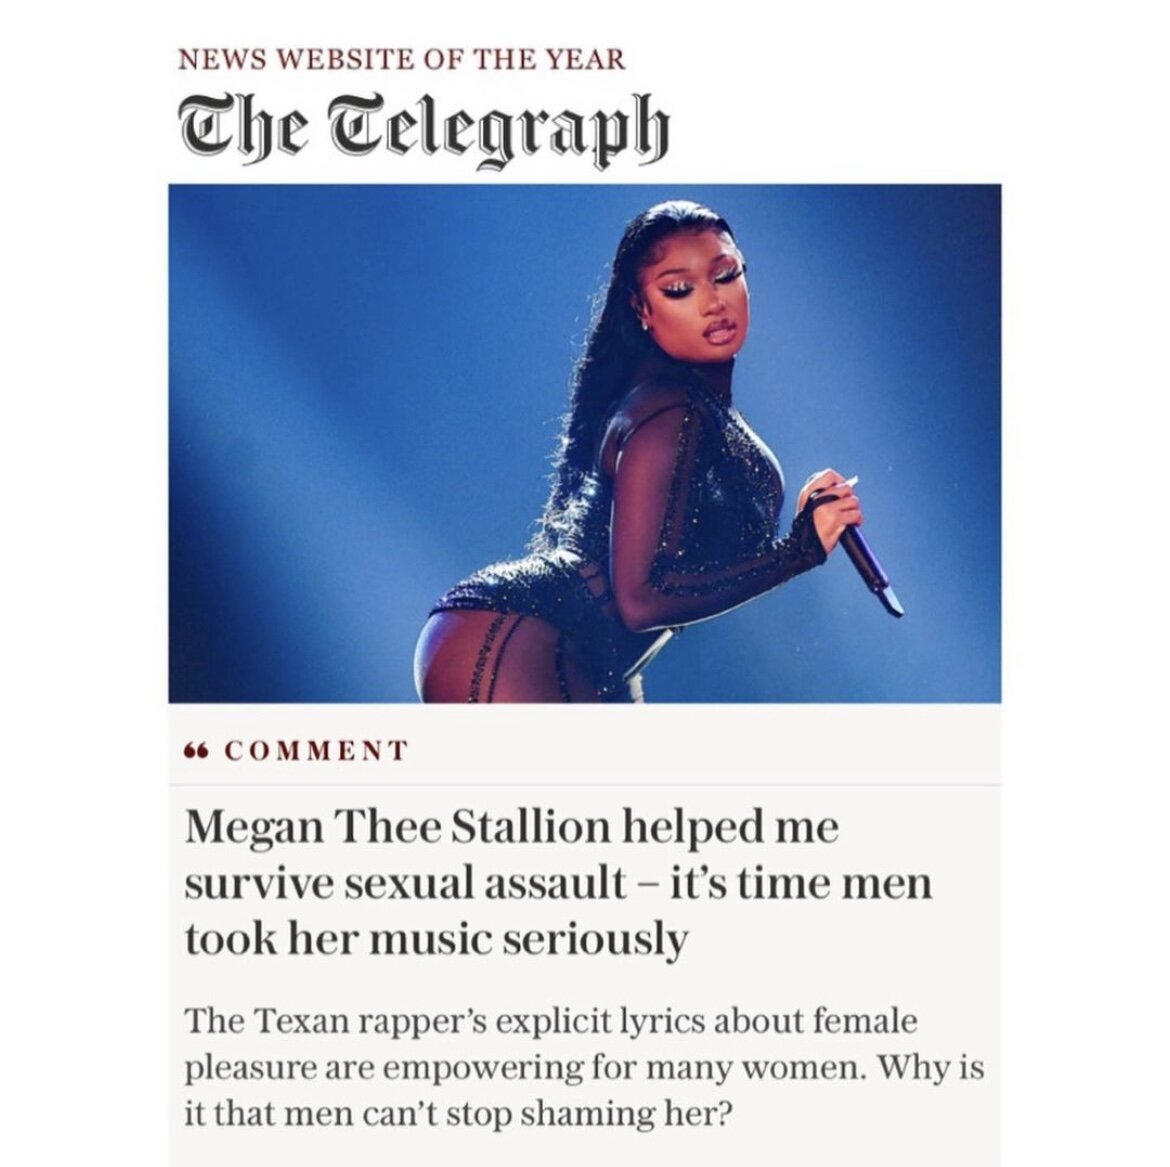  Article in The Telegraph: Megan Thee Stallion helped me survive sexual assault - it’s time men took her music seriously 